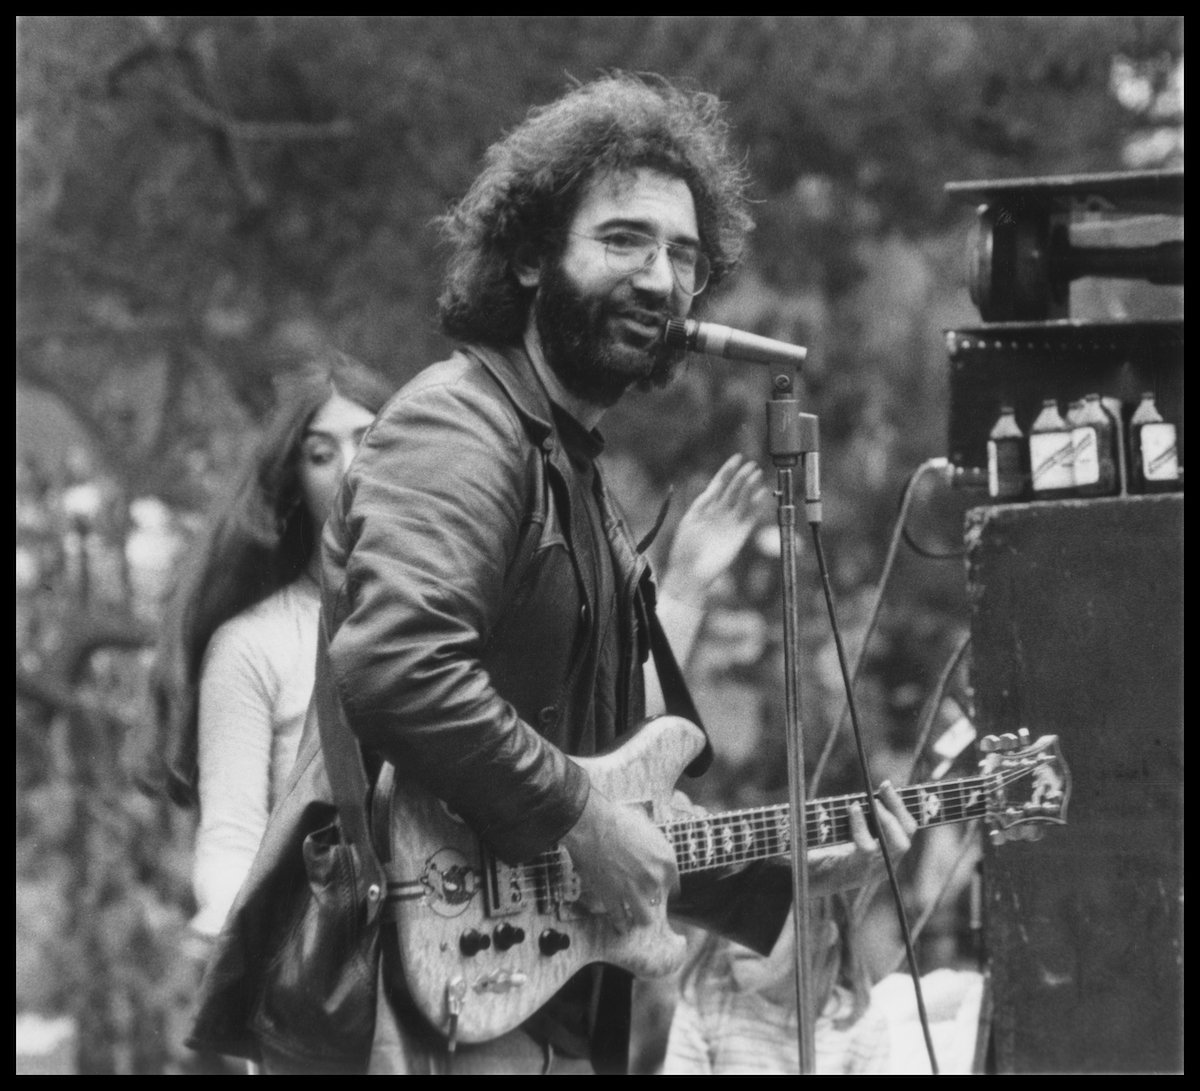 Rock musician Jerry Garcia of the Grateful Dead performs onstage in Golden Gate Park, San Francisco, in 1974